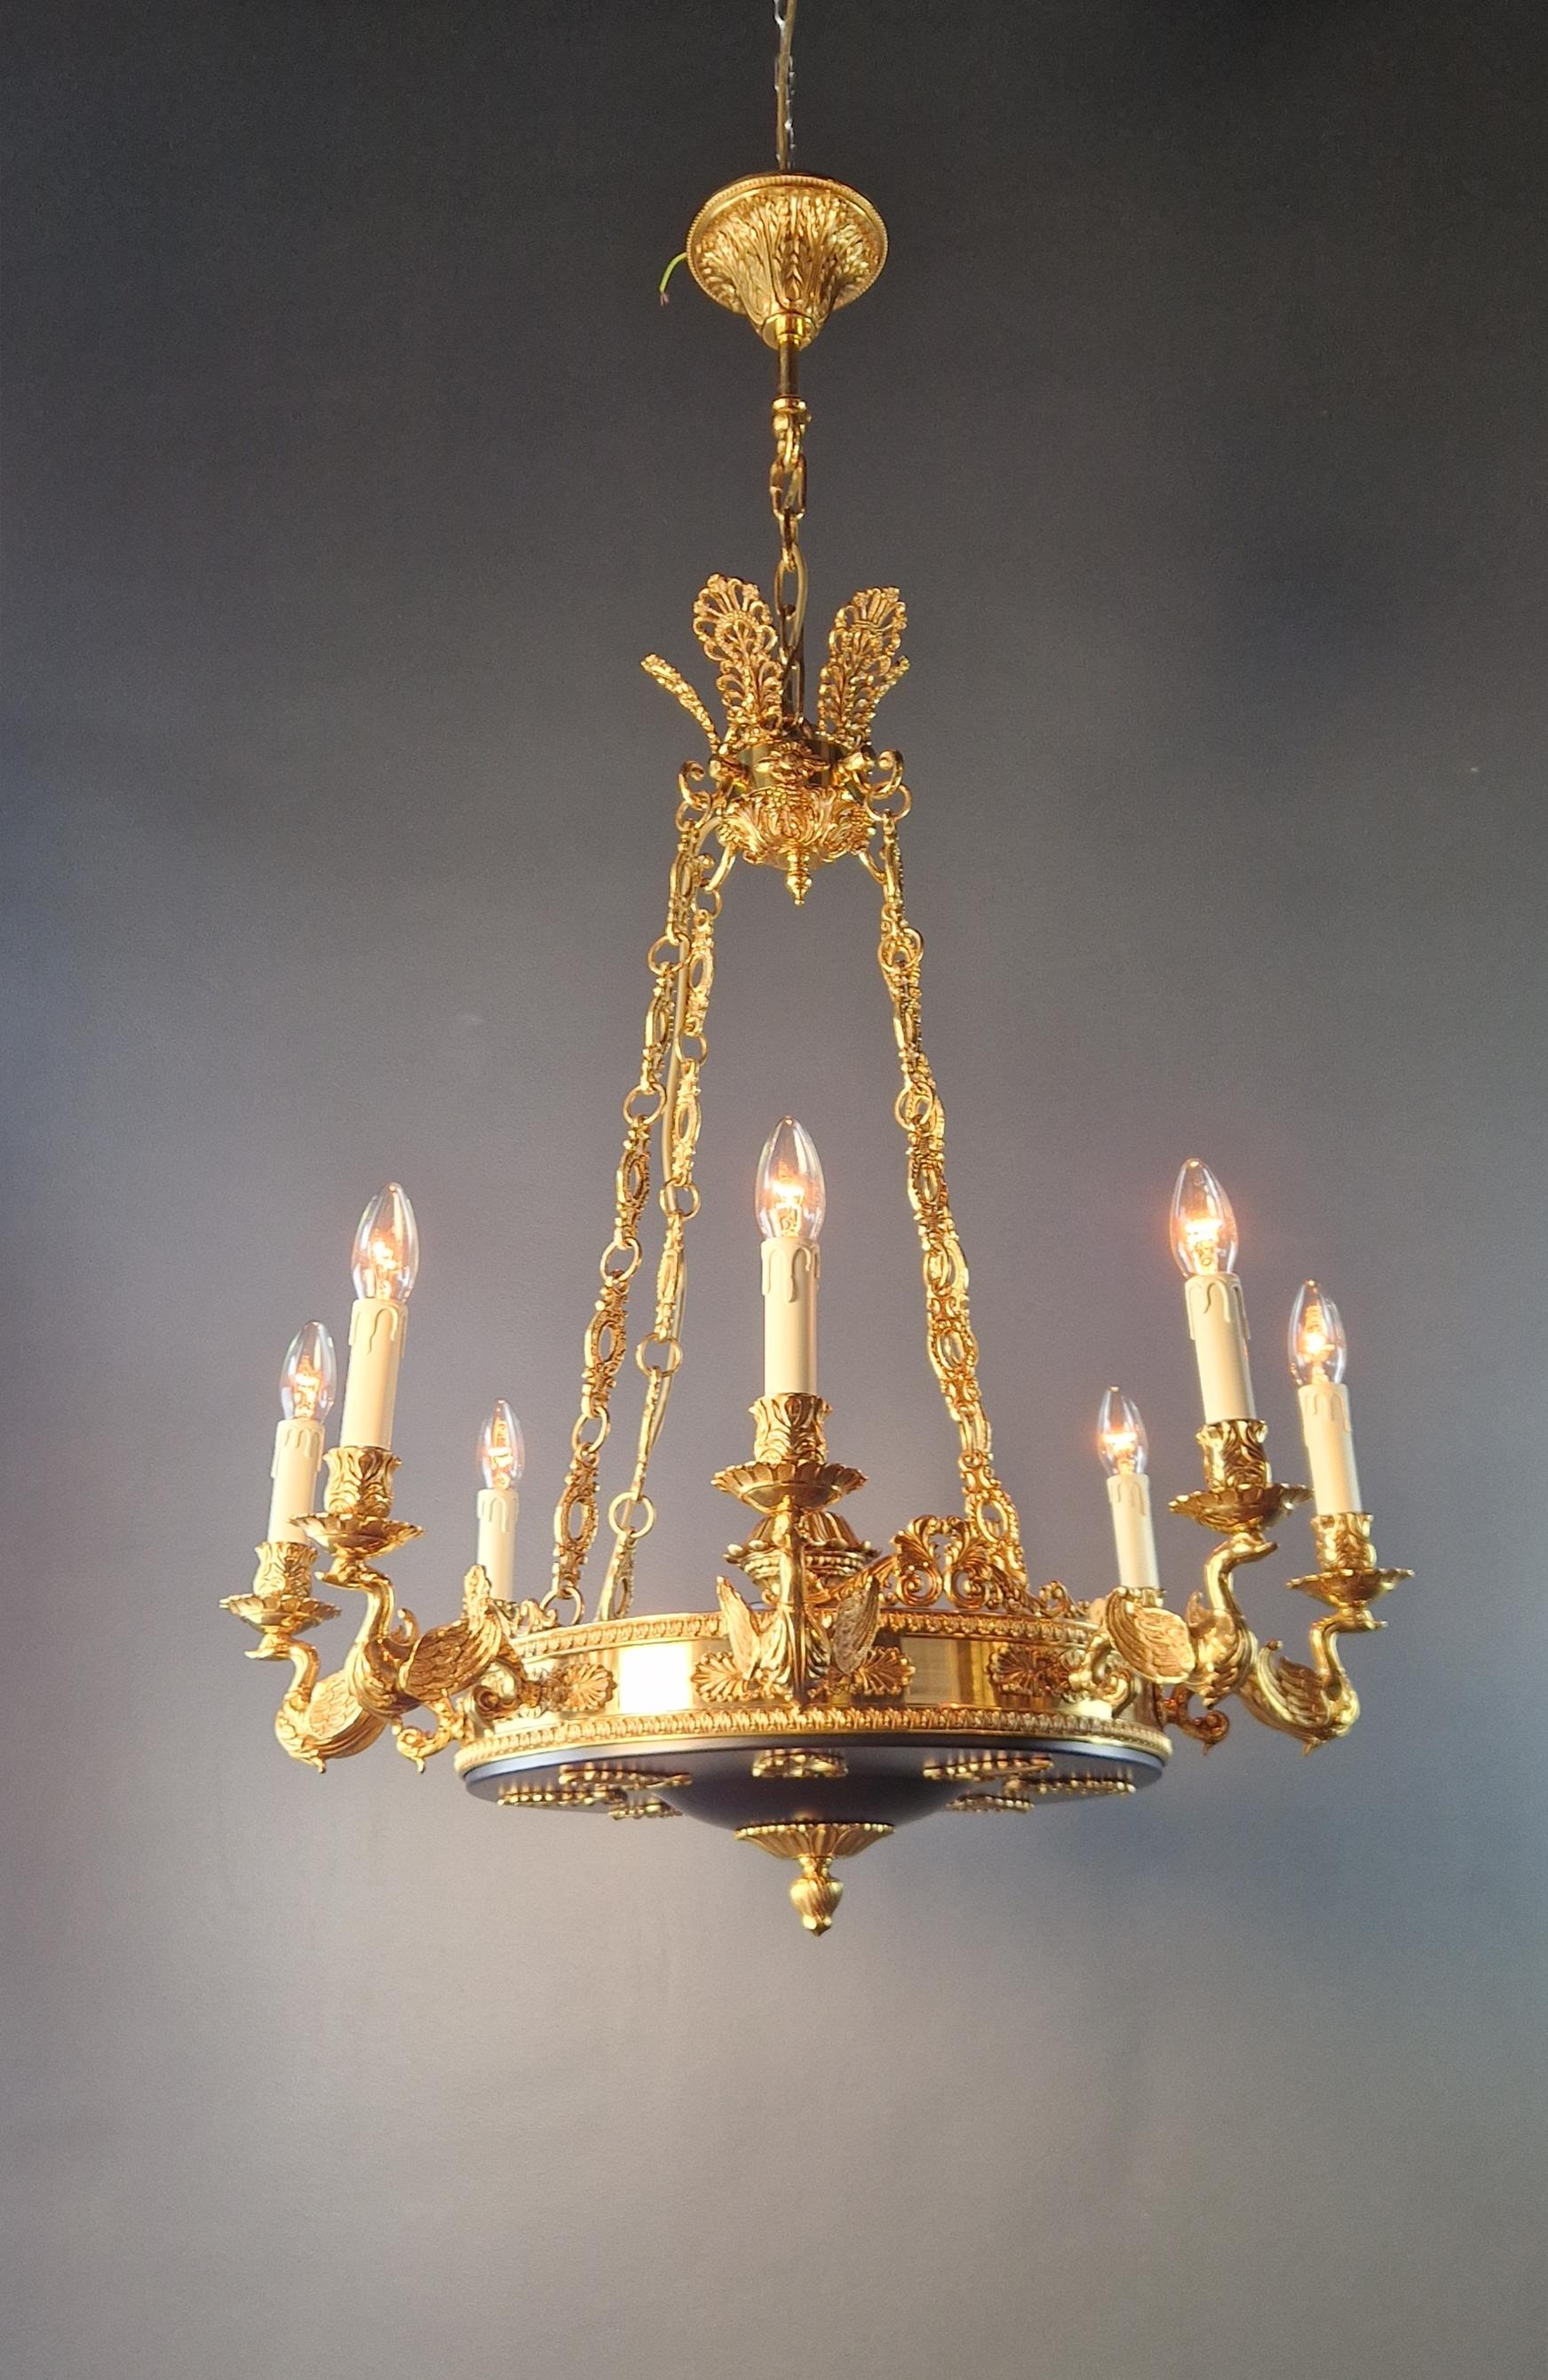 Swan French Brass Empire Chandelier Lustre Lamp Antique Gold For Sale 4